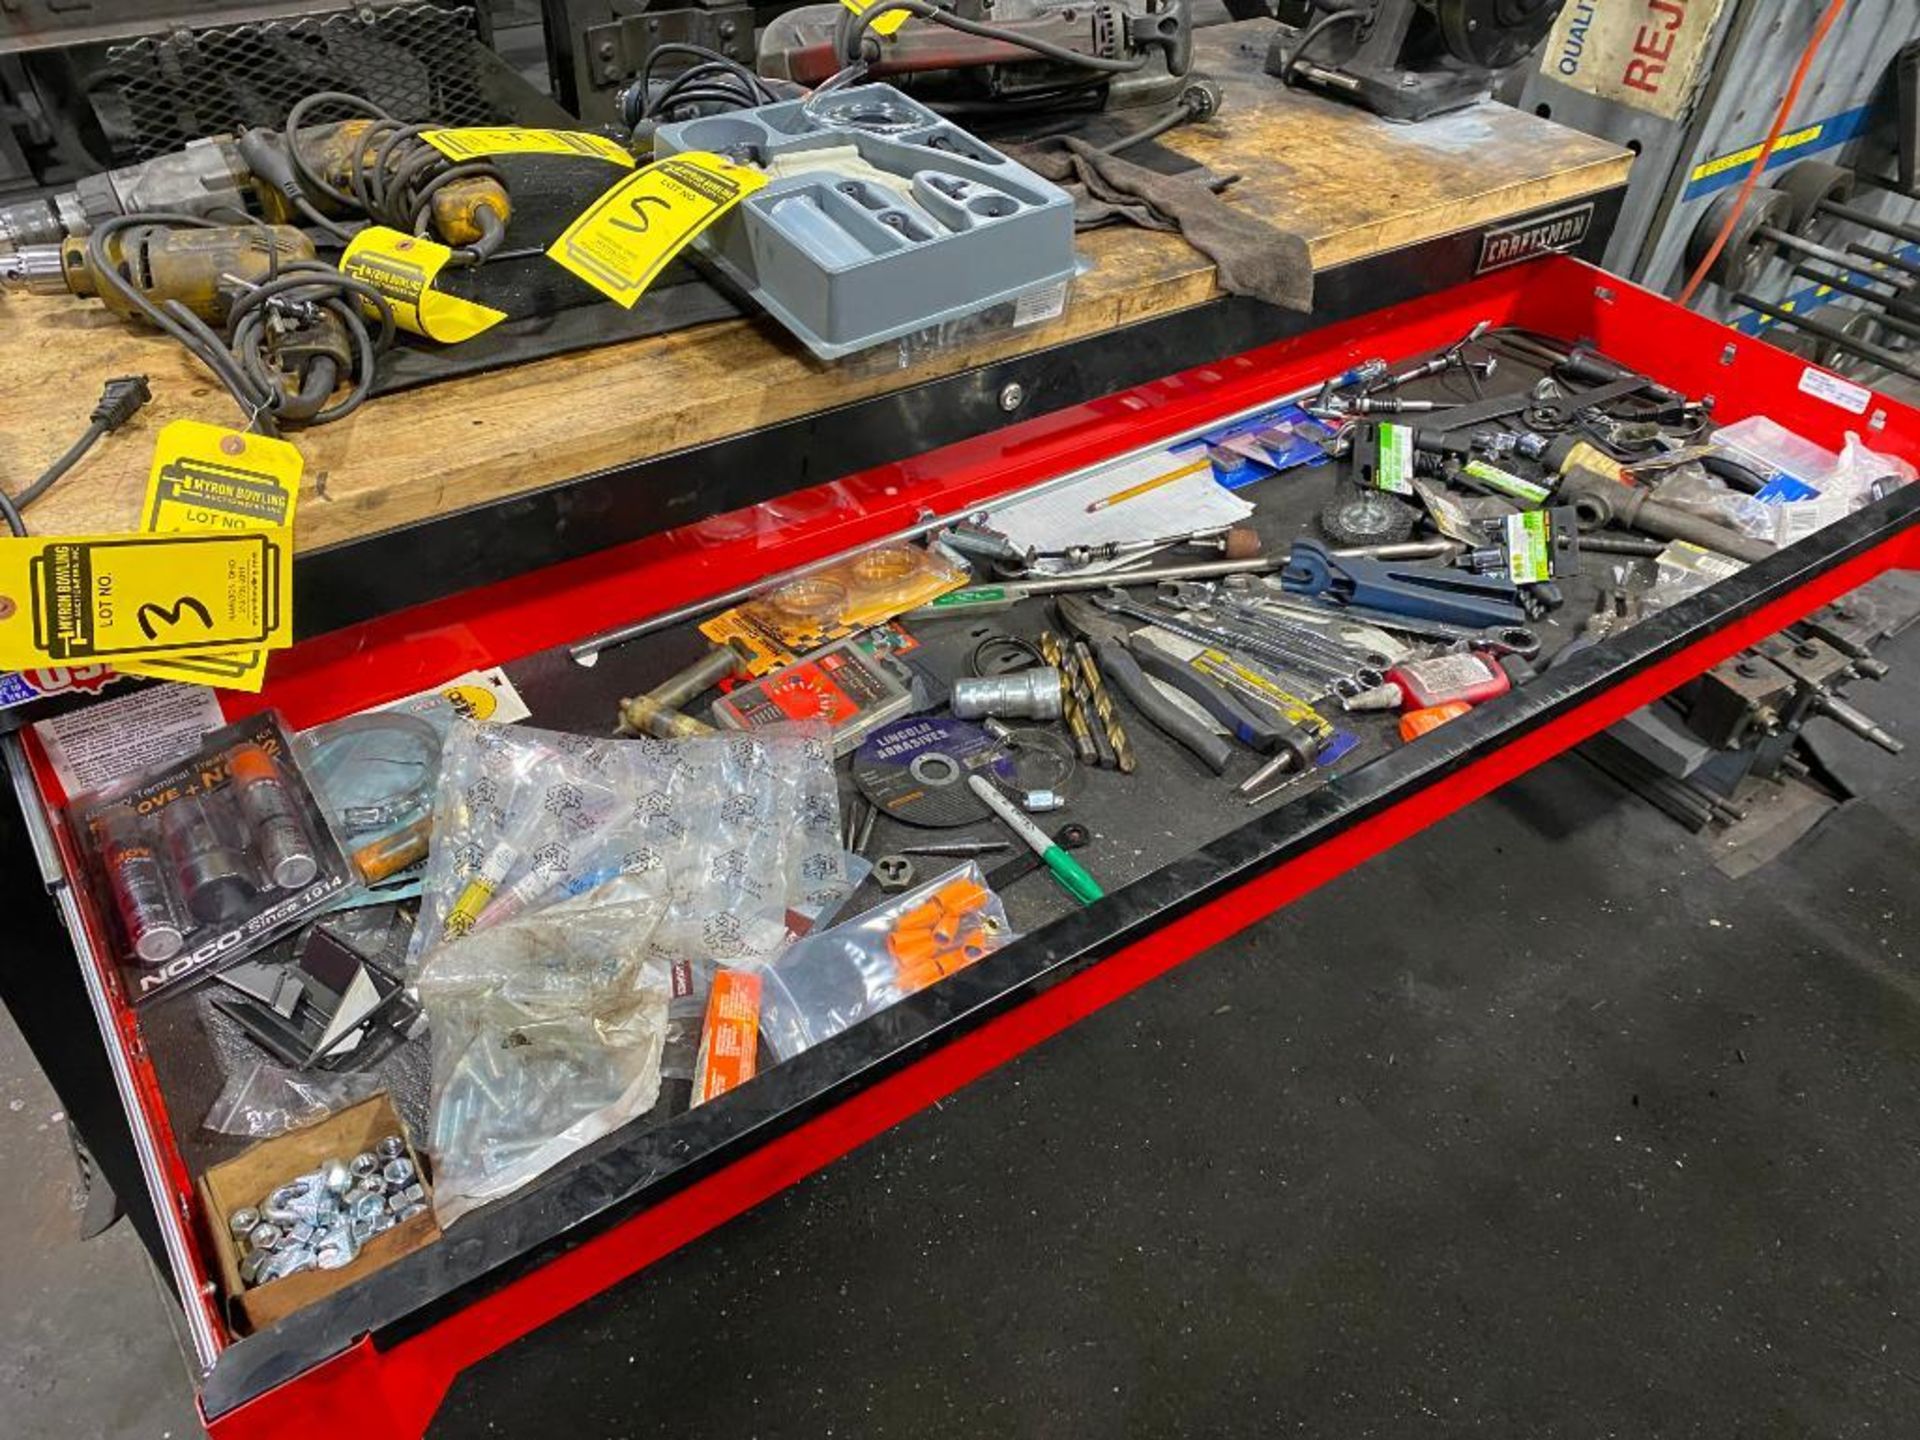 CRAFTSMAN TOOLBOX W/ BENCH GRINDER, WILTON VISE, COMBINATION WRENCHES, GREASE GUN, AIR HOSE, & SOCKE - Image 2 of 7